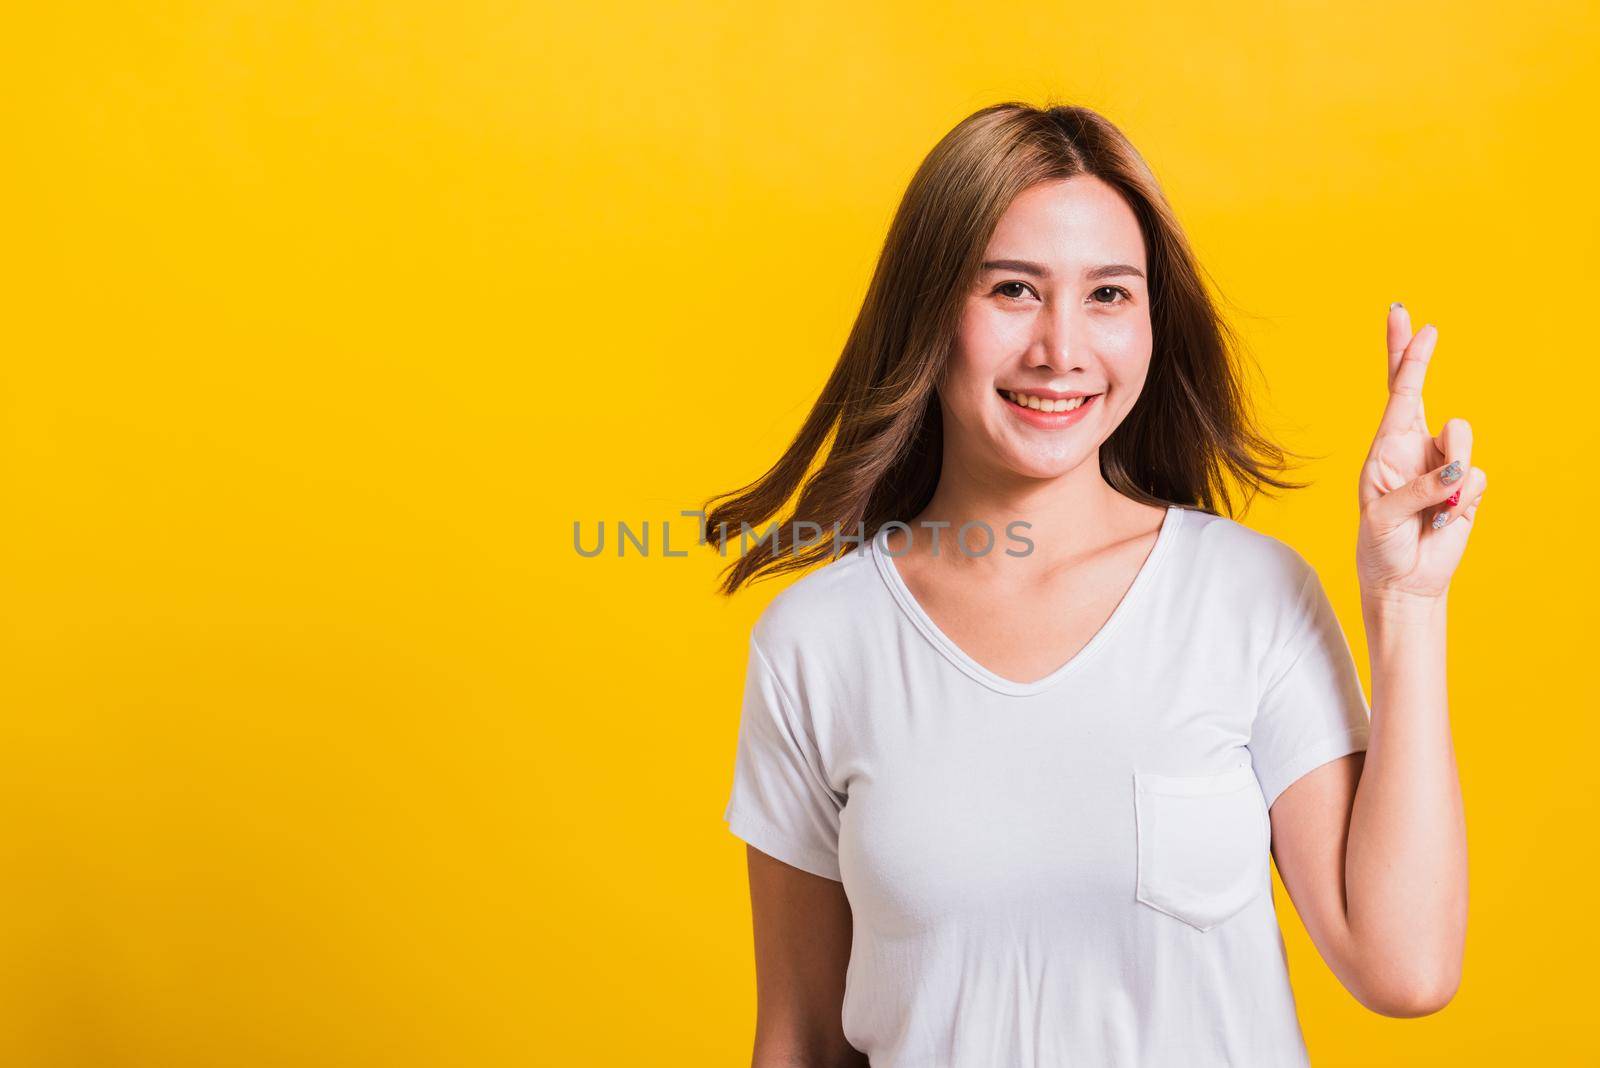 Asian Thai happy portrait beautiful cute young woman smile have superstition her holding fingers crossed for good luck and looking to camera, studio shot isolated on yellow background with copy space